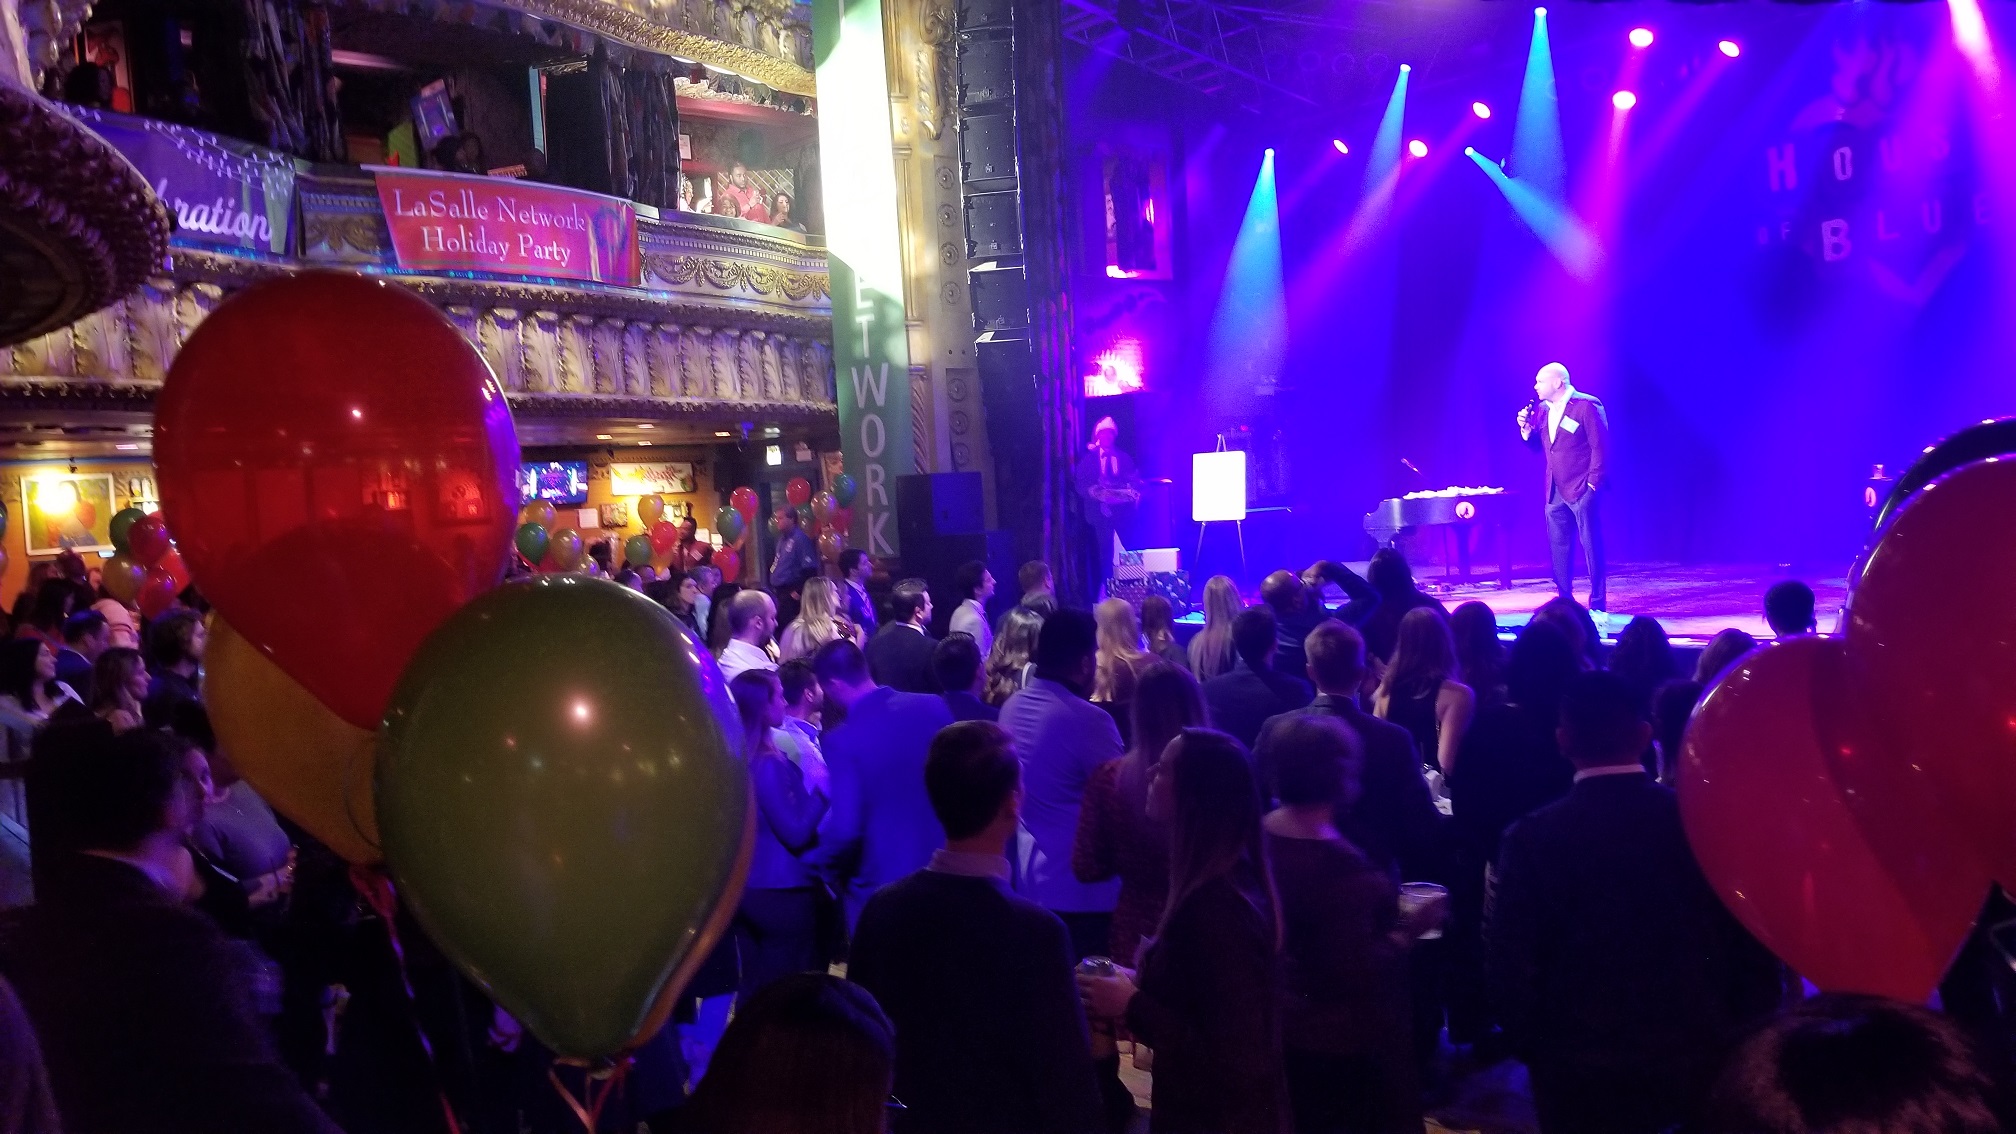 IMC attended the LaSalle Network 2019 Holiday Party, held at the House of Blues in downtown Chicago. 